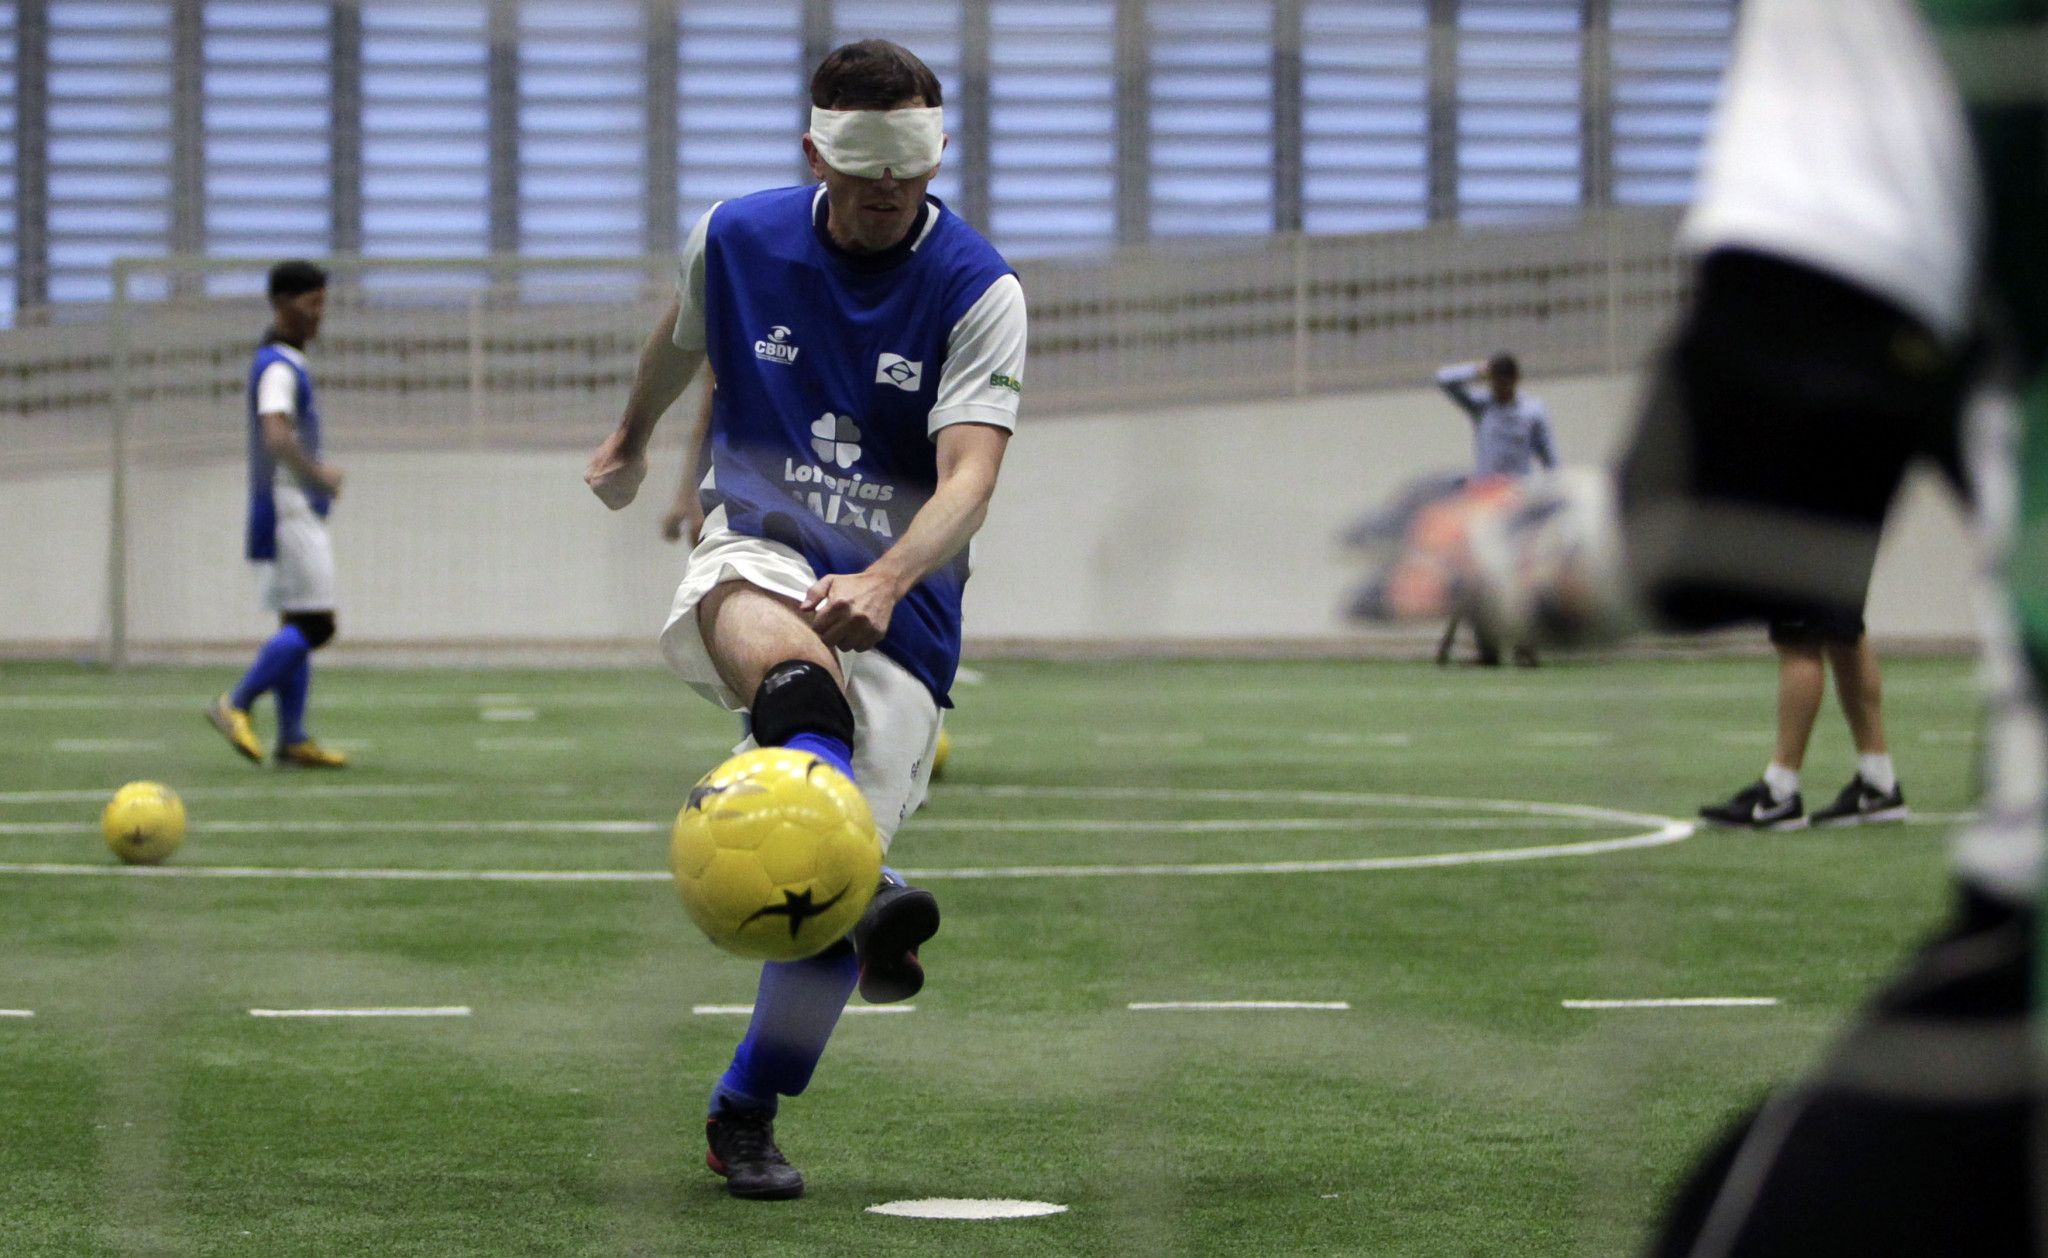 The IBSA Blind Football World Grand Prix has been confirmed for March 2019 in Tokyo. ©Getty Images 